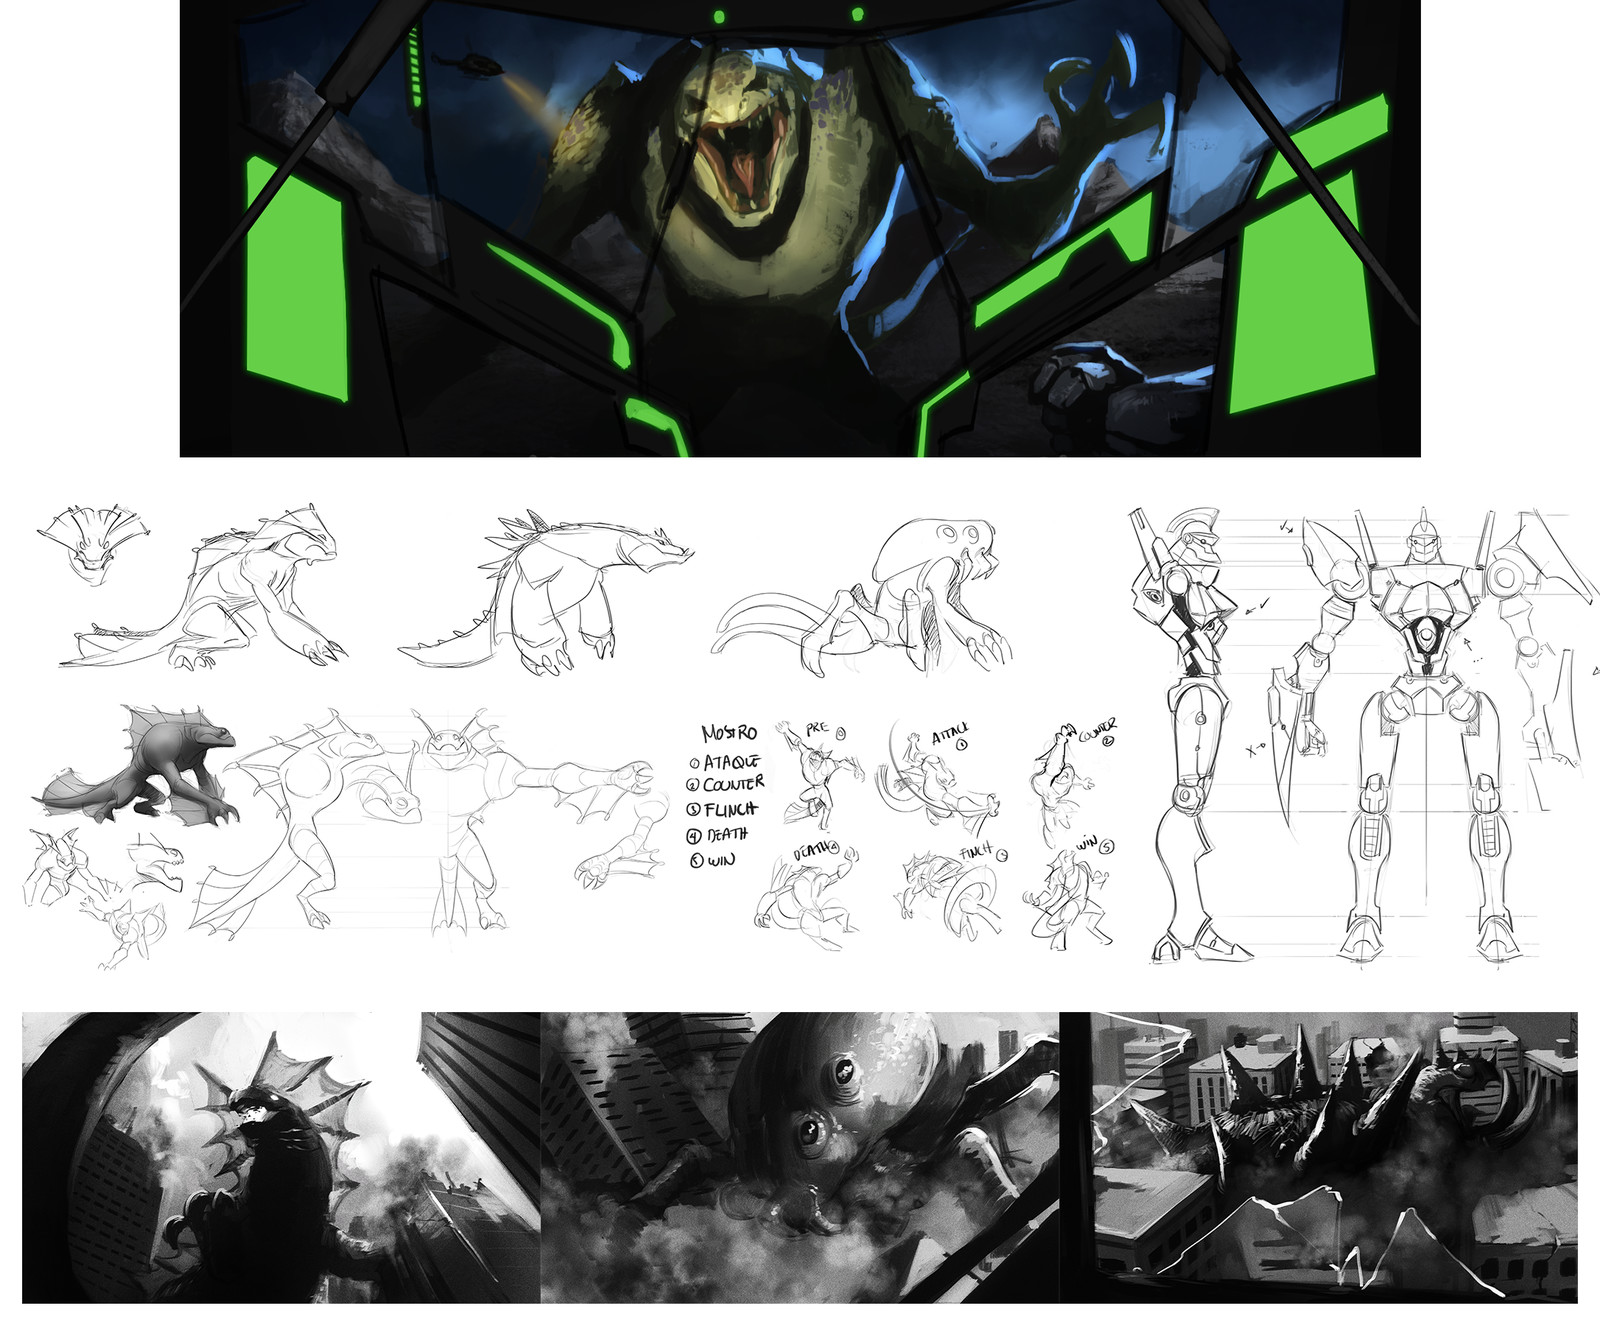 Giant Robots vs Monsters Game concept for Occulus Rift.